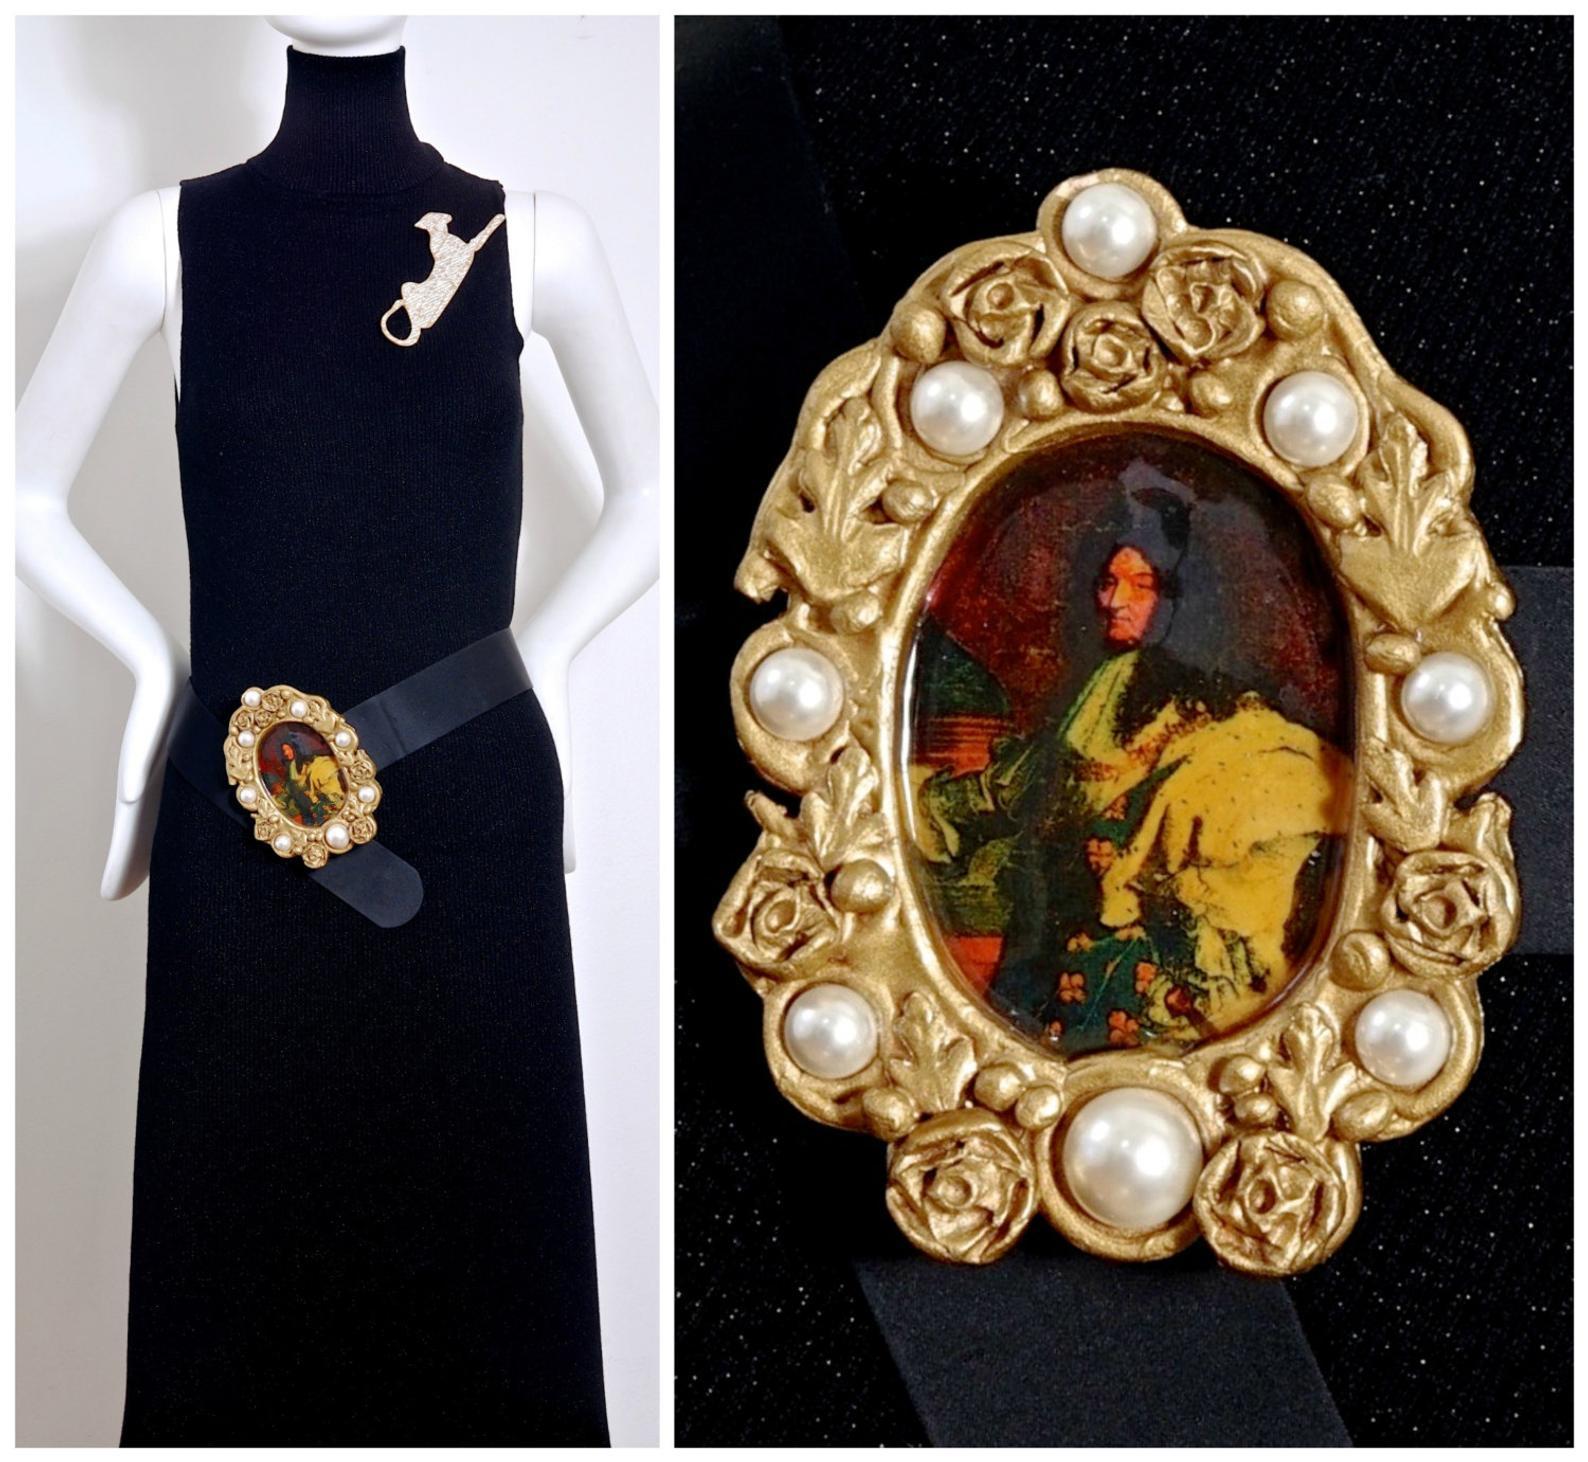 Vintage DOLCE & GABBANA King Louis XIV Frame Portrait Belt

Measurements:
Buckle: 5 4/8 inches X 4 inches
Height: 2 inches
Wearable Length: 30 inches to 31 4/8 inches

Features:
- 100% Authentic DOLCE & GABBANA .
- Massive portrait of King LOUIS XIV